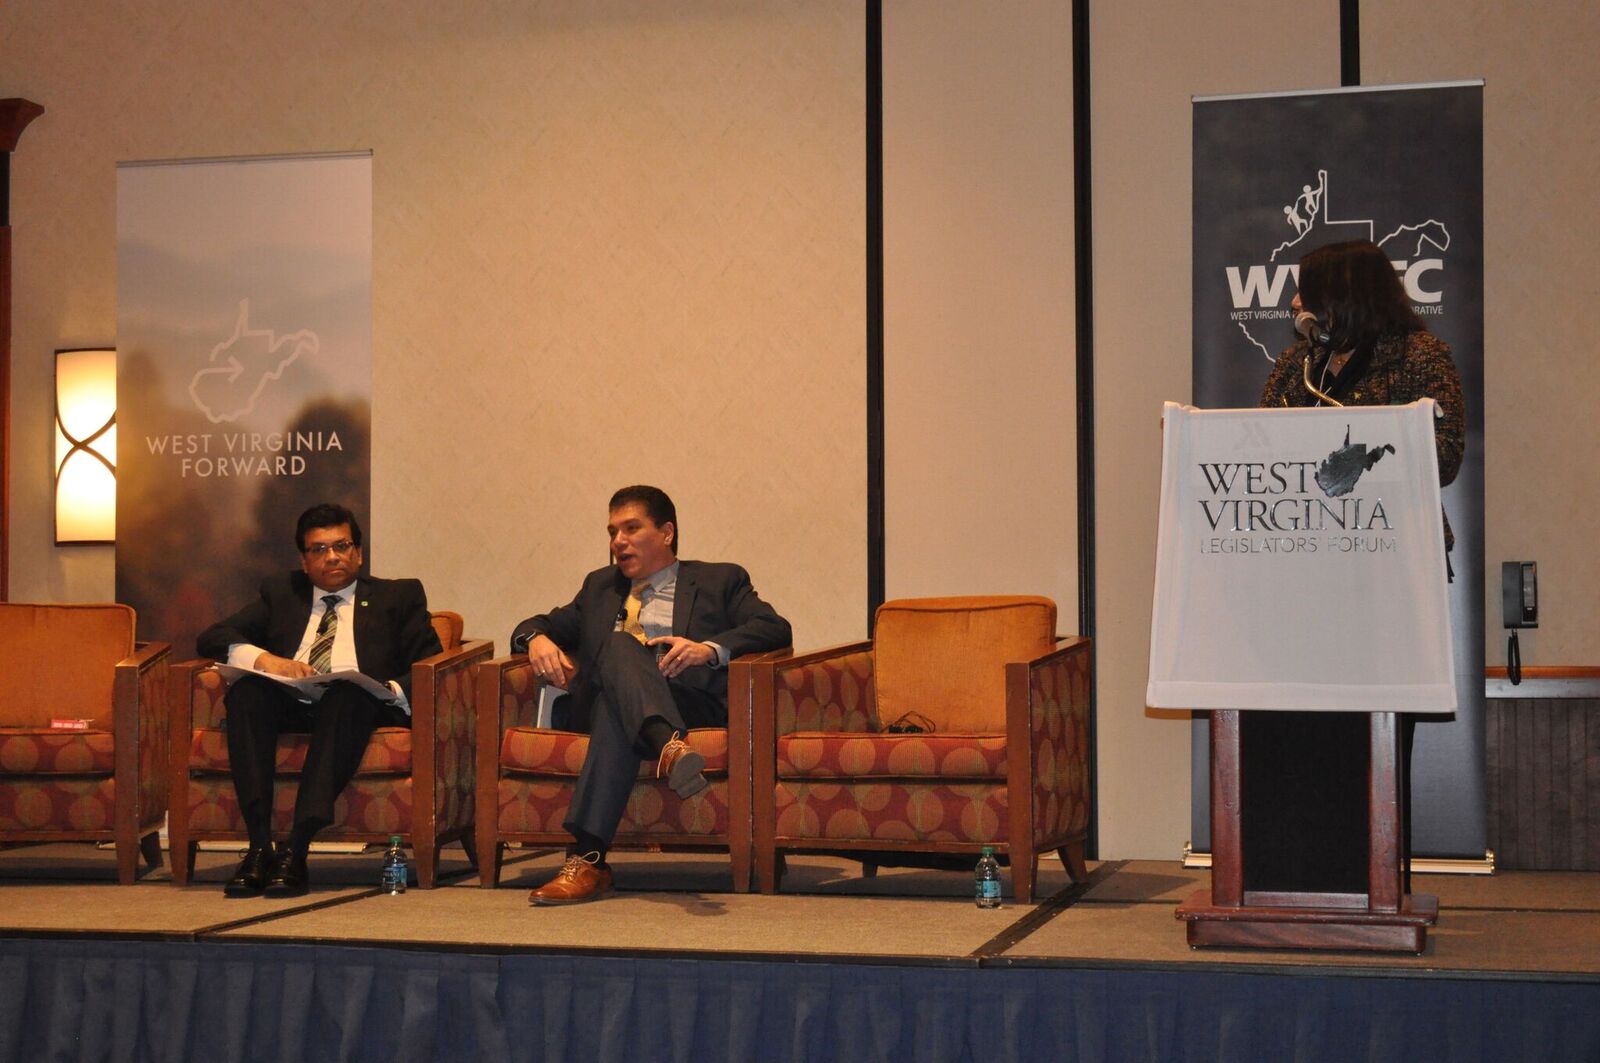 Avinandan Mukherjee, Marshall’s Dean of the Lewis College of Business, and Javier Reyes, WVU’s Dean of the John Chambers College of Business and Economics, participate in a panel, moderated by WVU Provost Joyce McConnell, during the WV Legislators' Forum